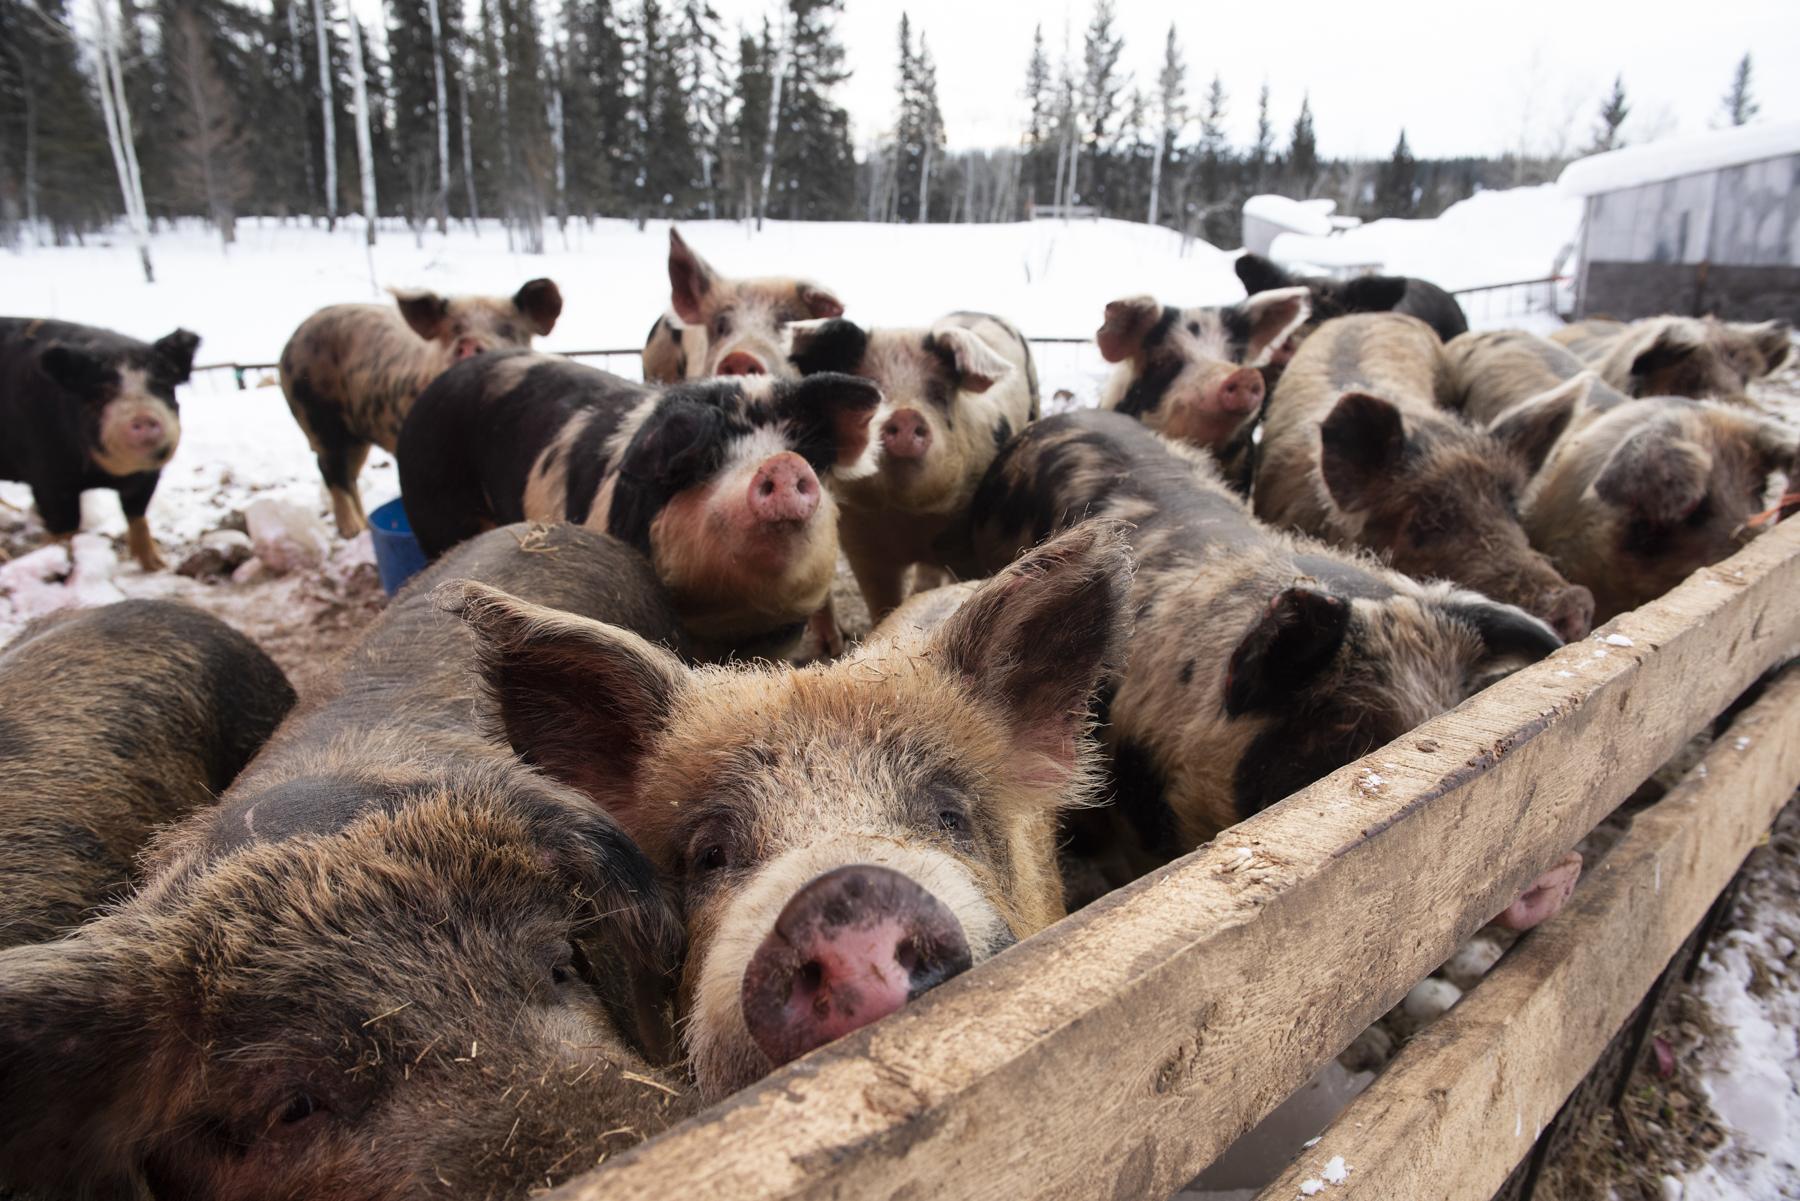 The Hunt for Healthy Food - Pigs are penned at the Farm Training Institute in Hay...